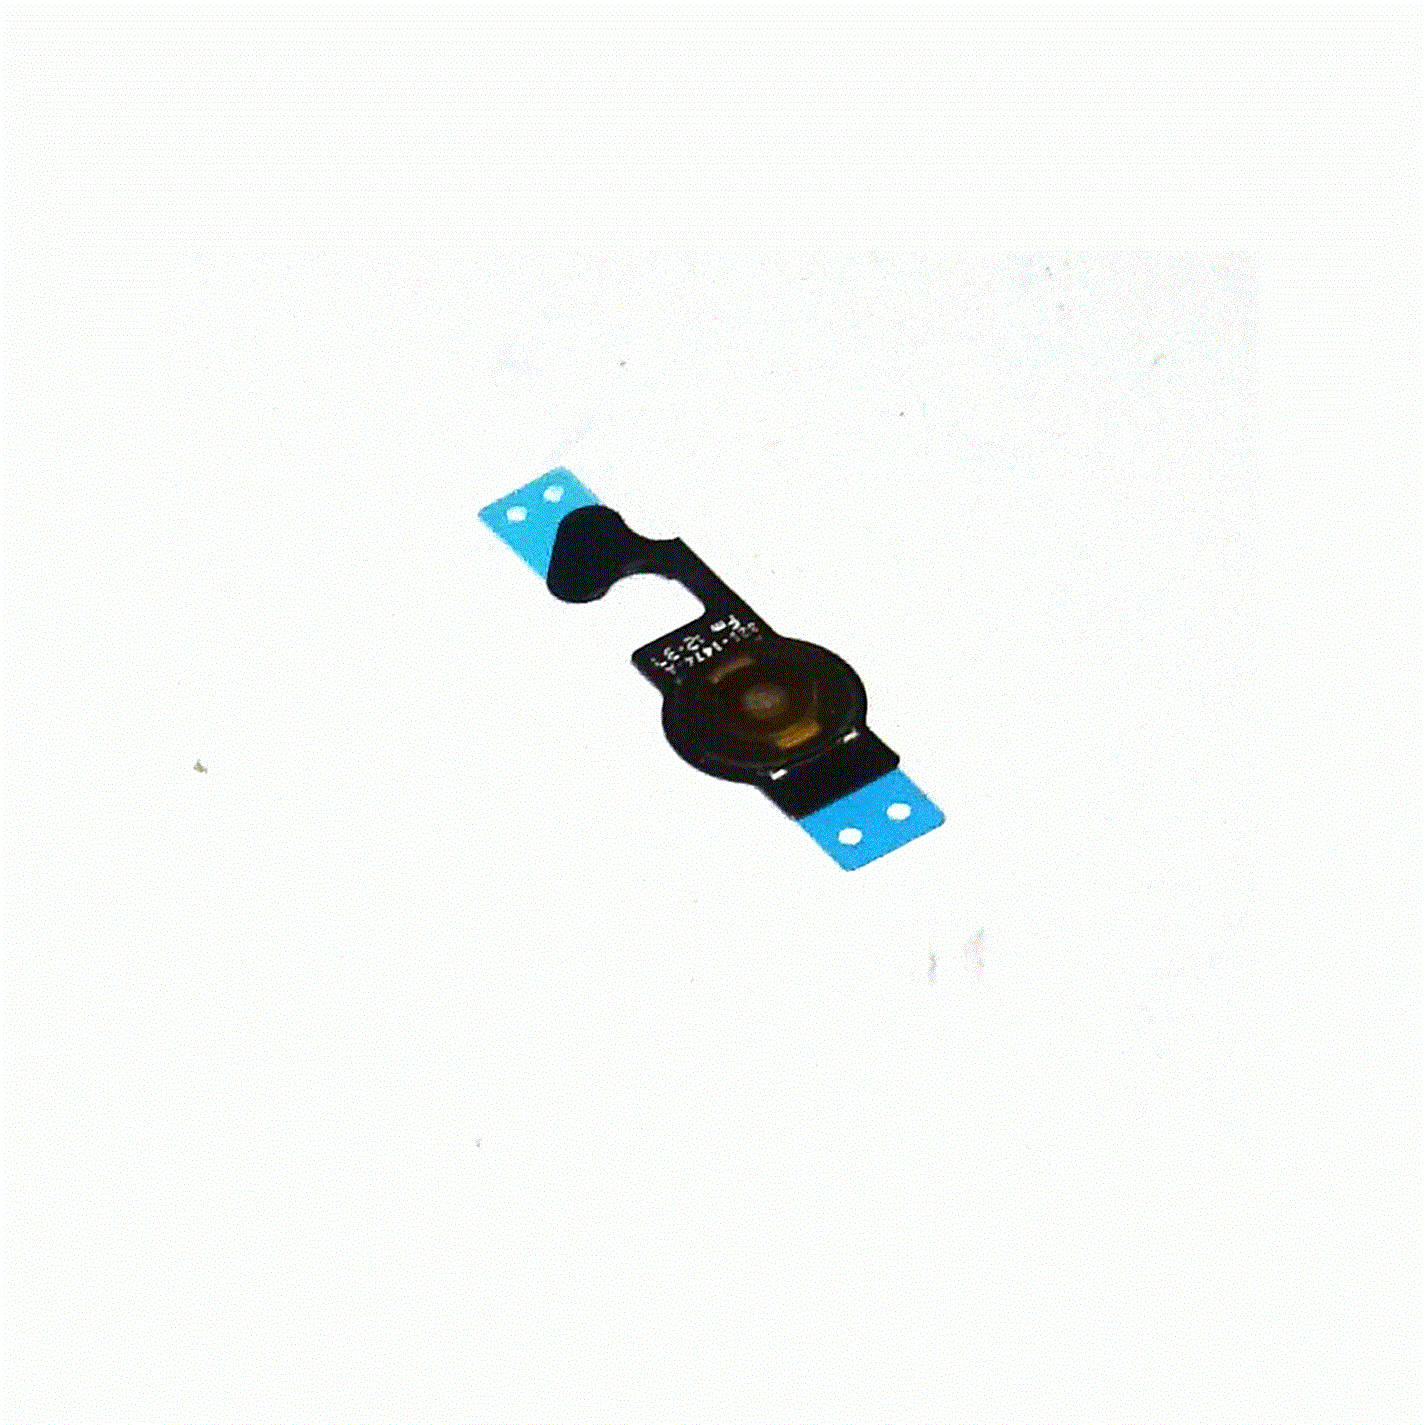 Home Button Return Keypad Flex Cable Ribbon PCB Replacement For iPhone 5 - UK Seller